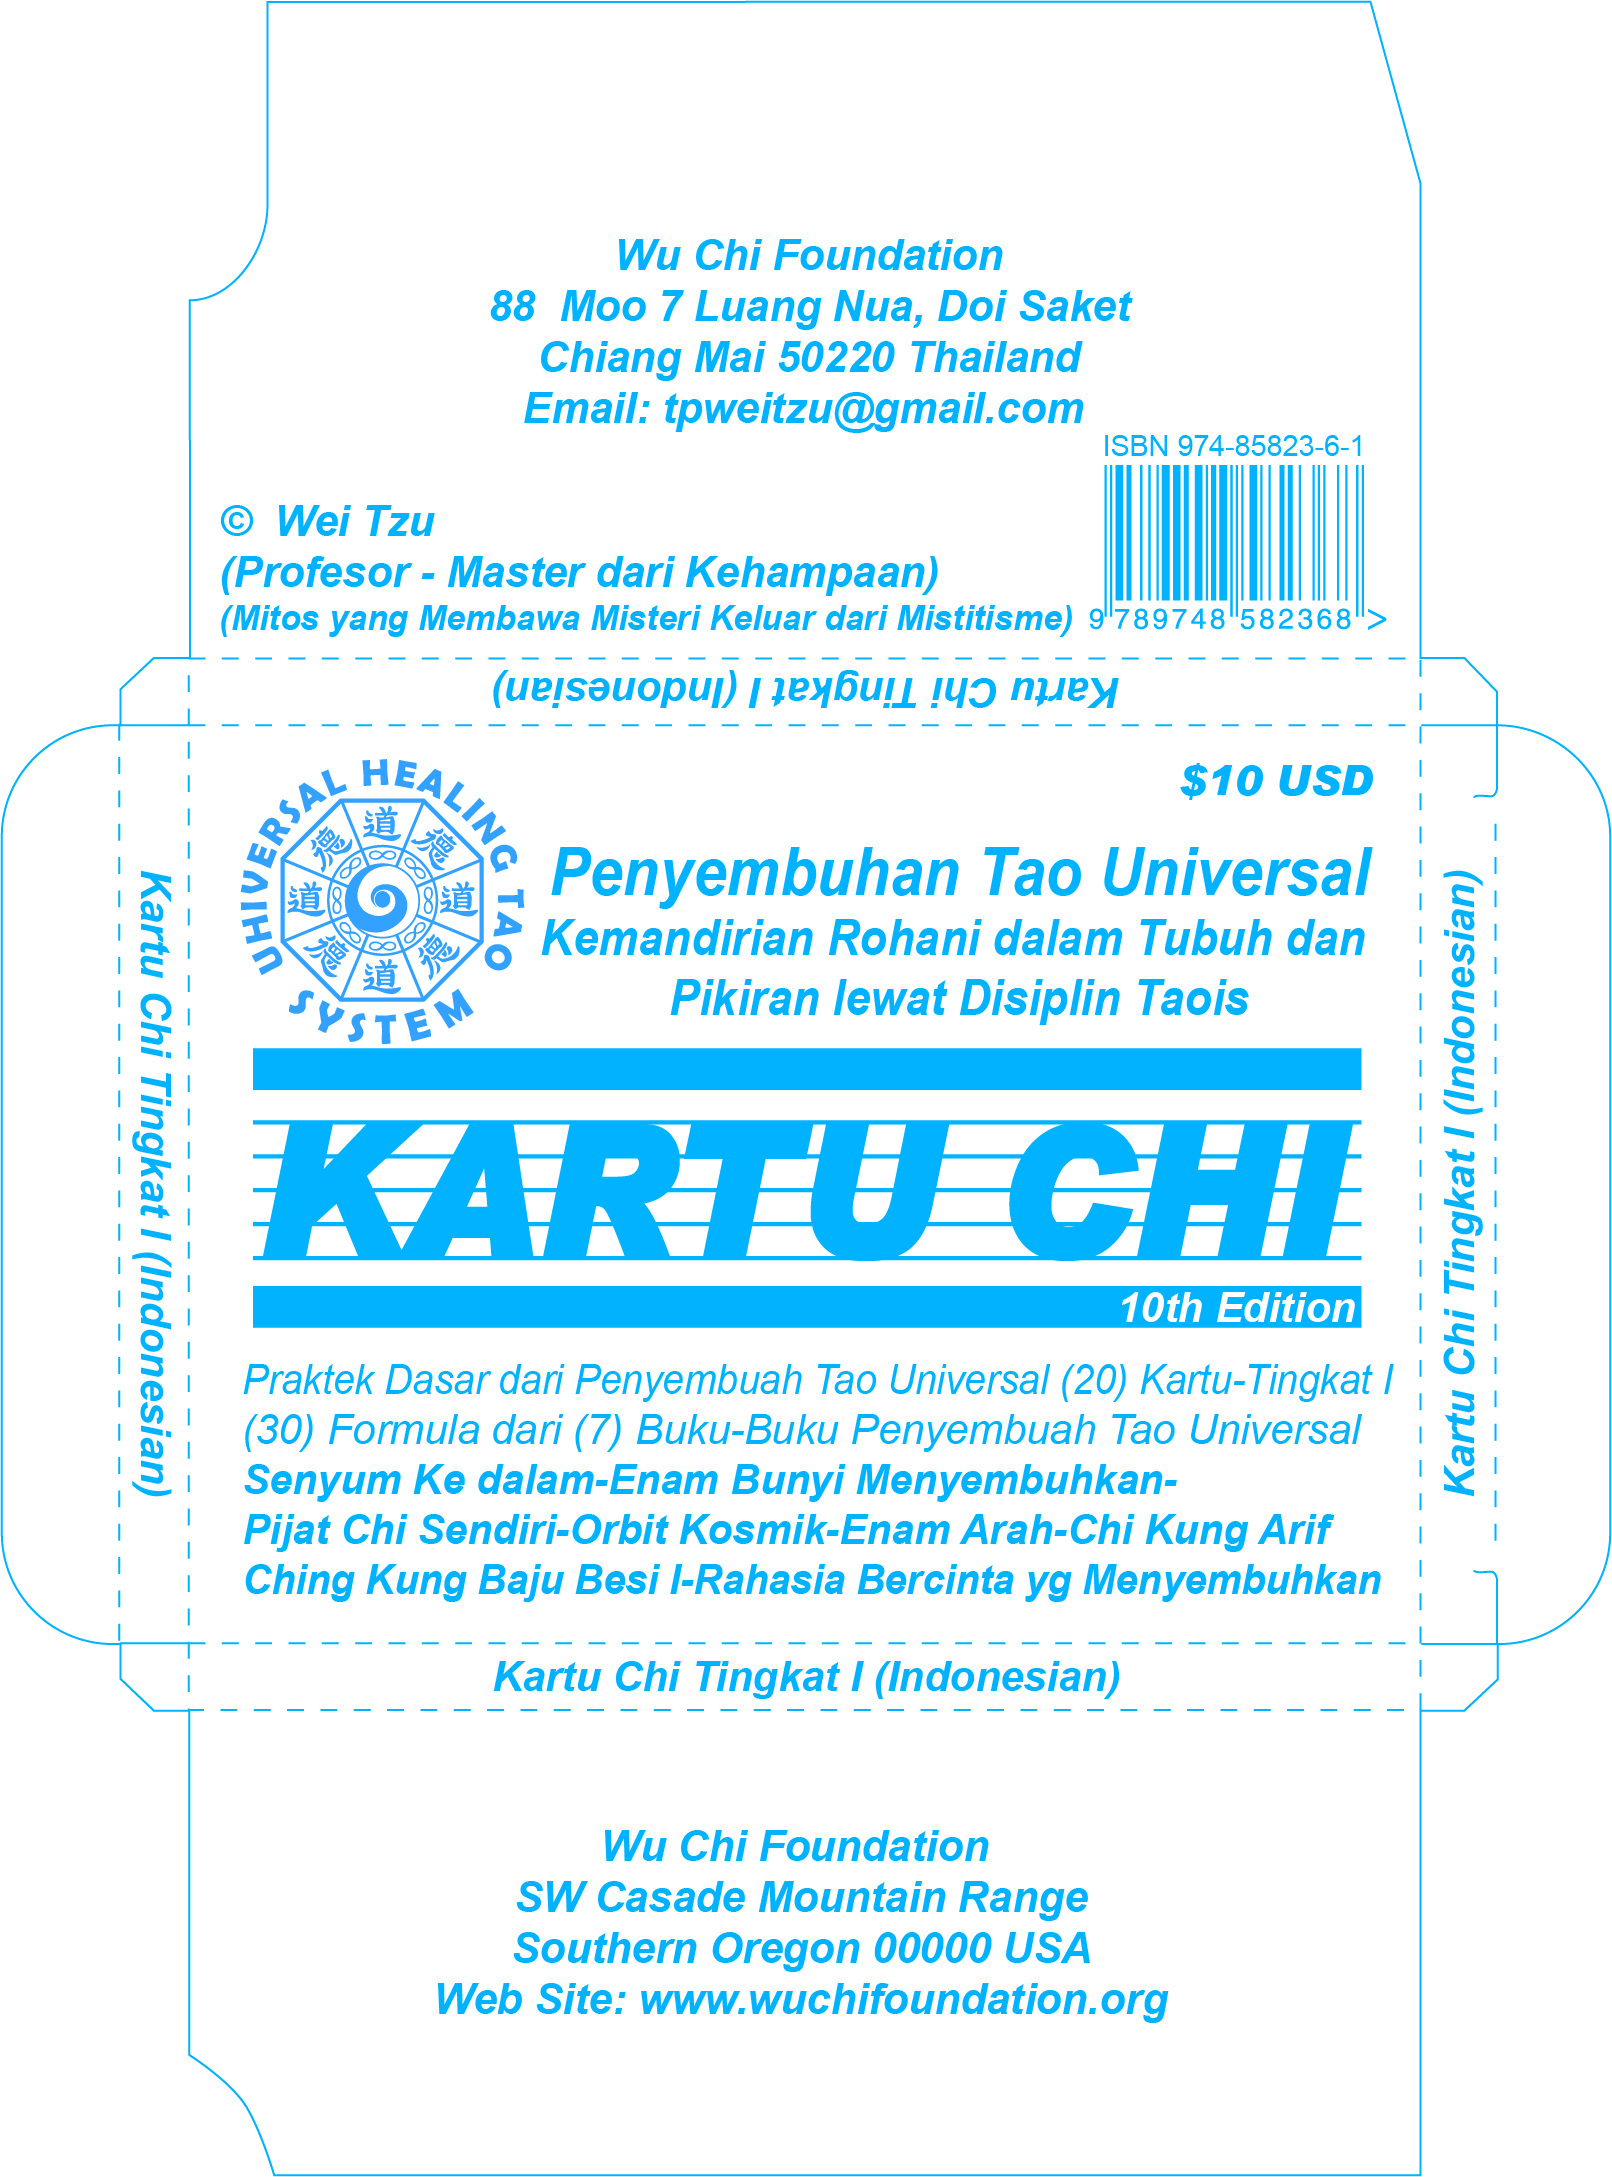 Indonesian Chi Cards - Level I (10 Edition)